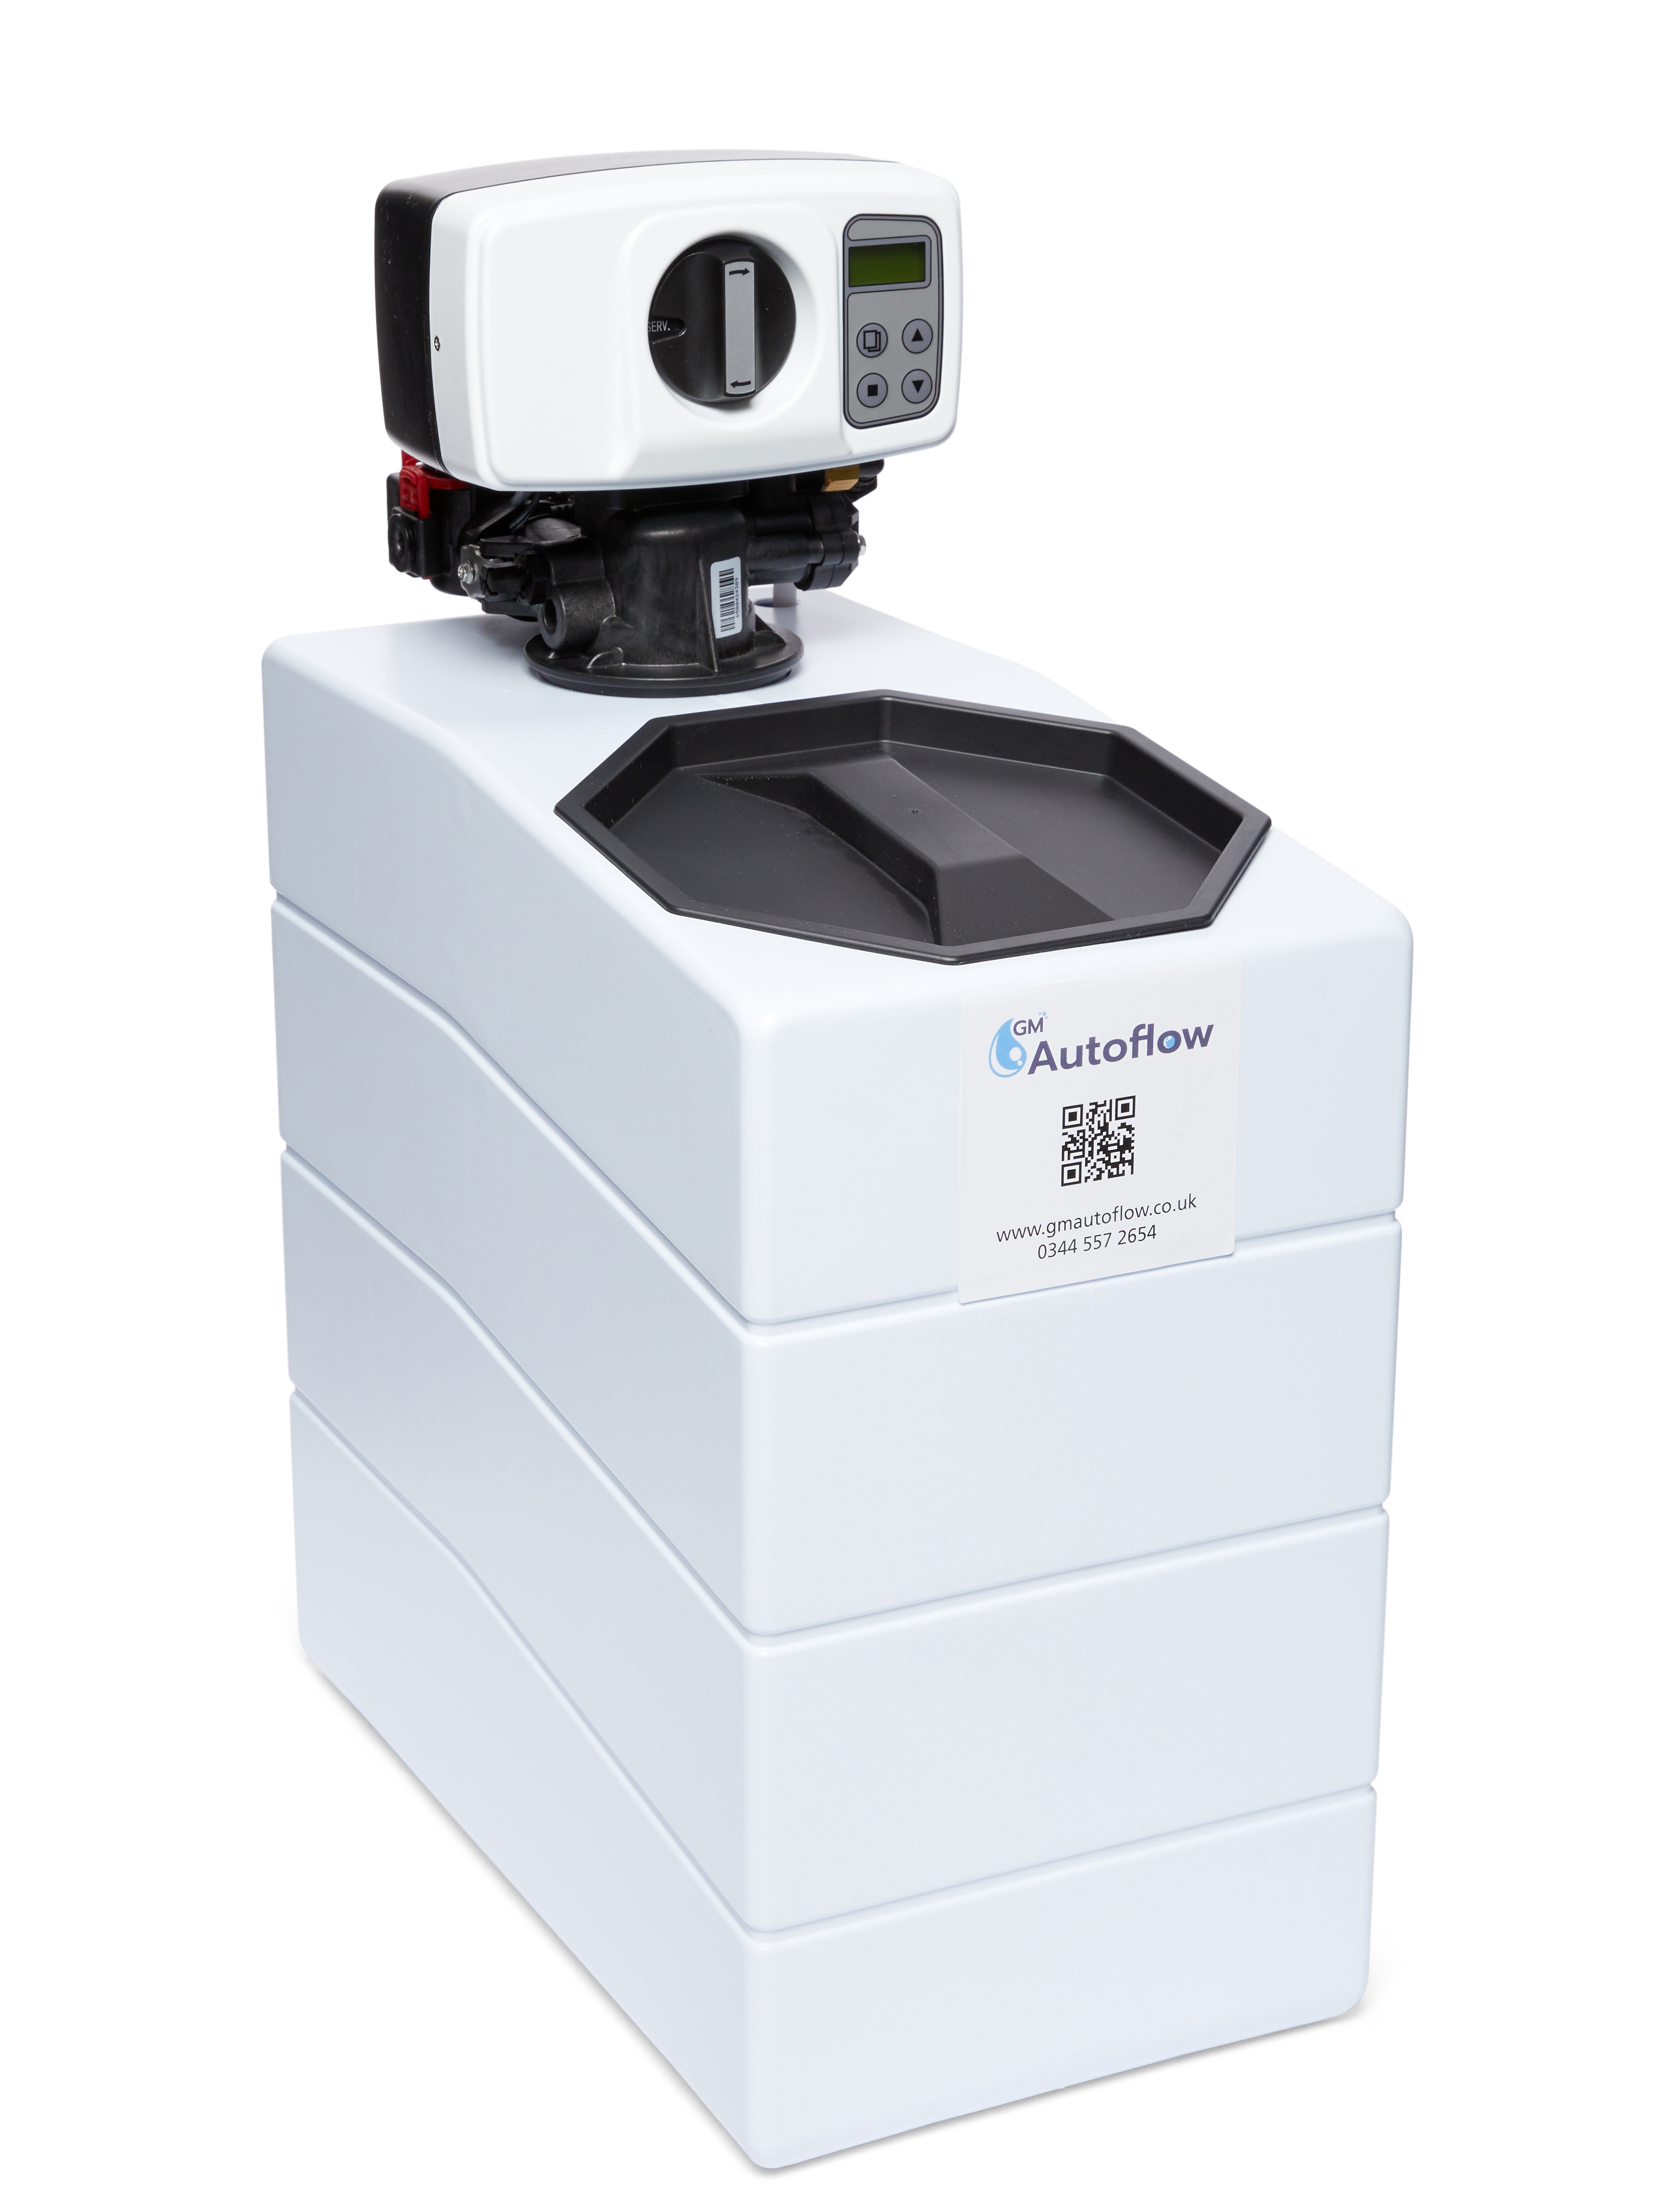 GM Autoflow Supersoft10 Automatic Cold Water Softener 